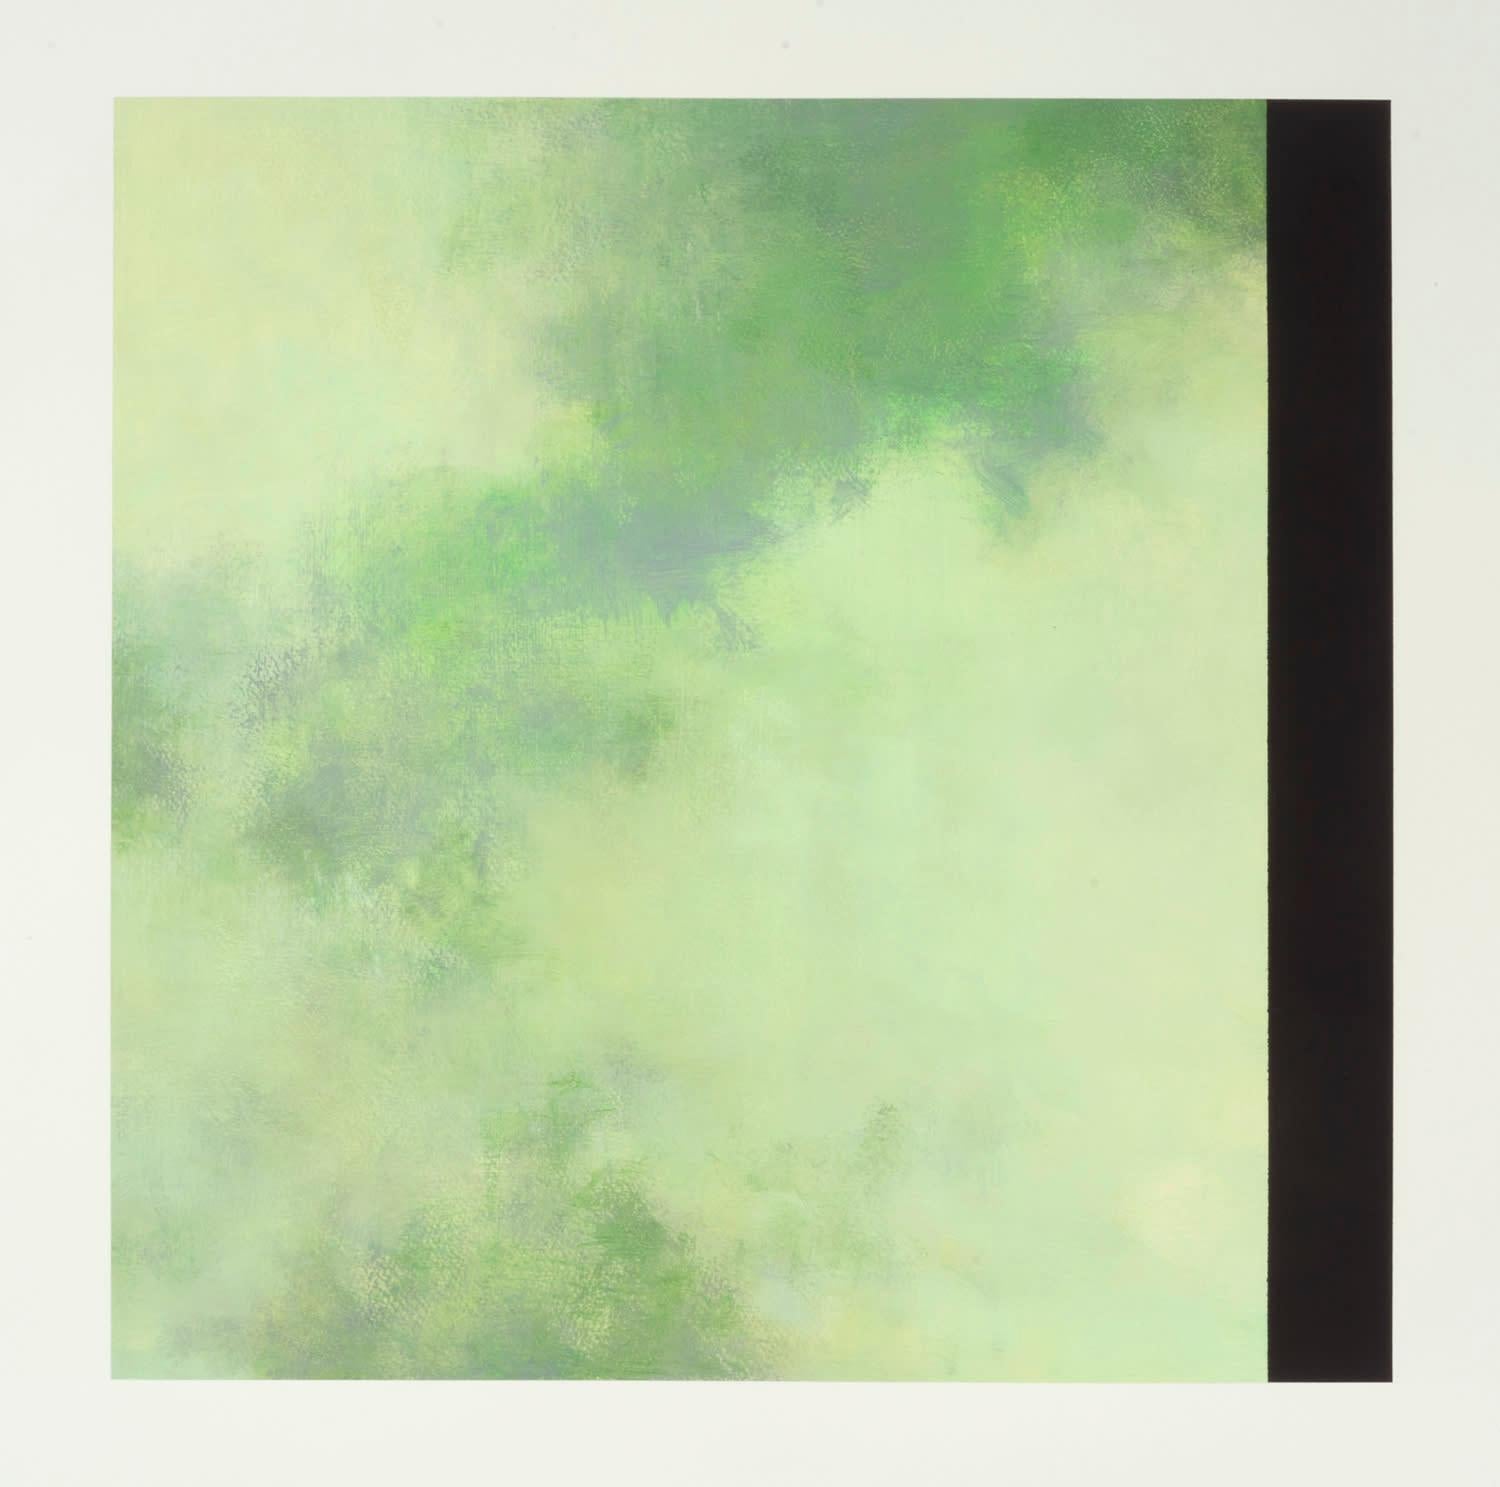 Tamar Zinn
Verdant Suite 5, 2021
oil on paper
image size: 17 x 17 in.
paper size: 22 x 22 in.
(zinn1062)

This colorful abstract oil painting on paper features layered, painterly swathes of green, white, and yellow that blend together to create